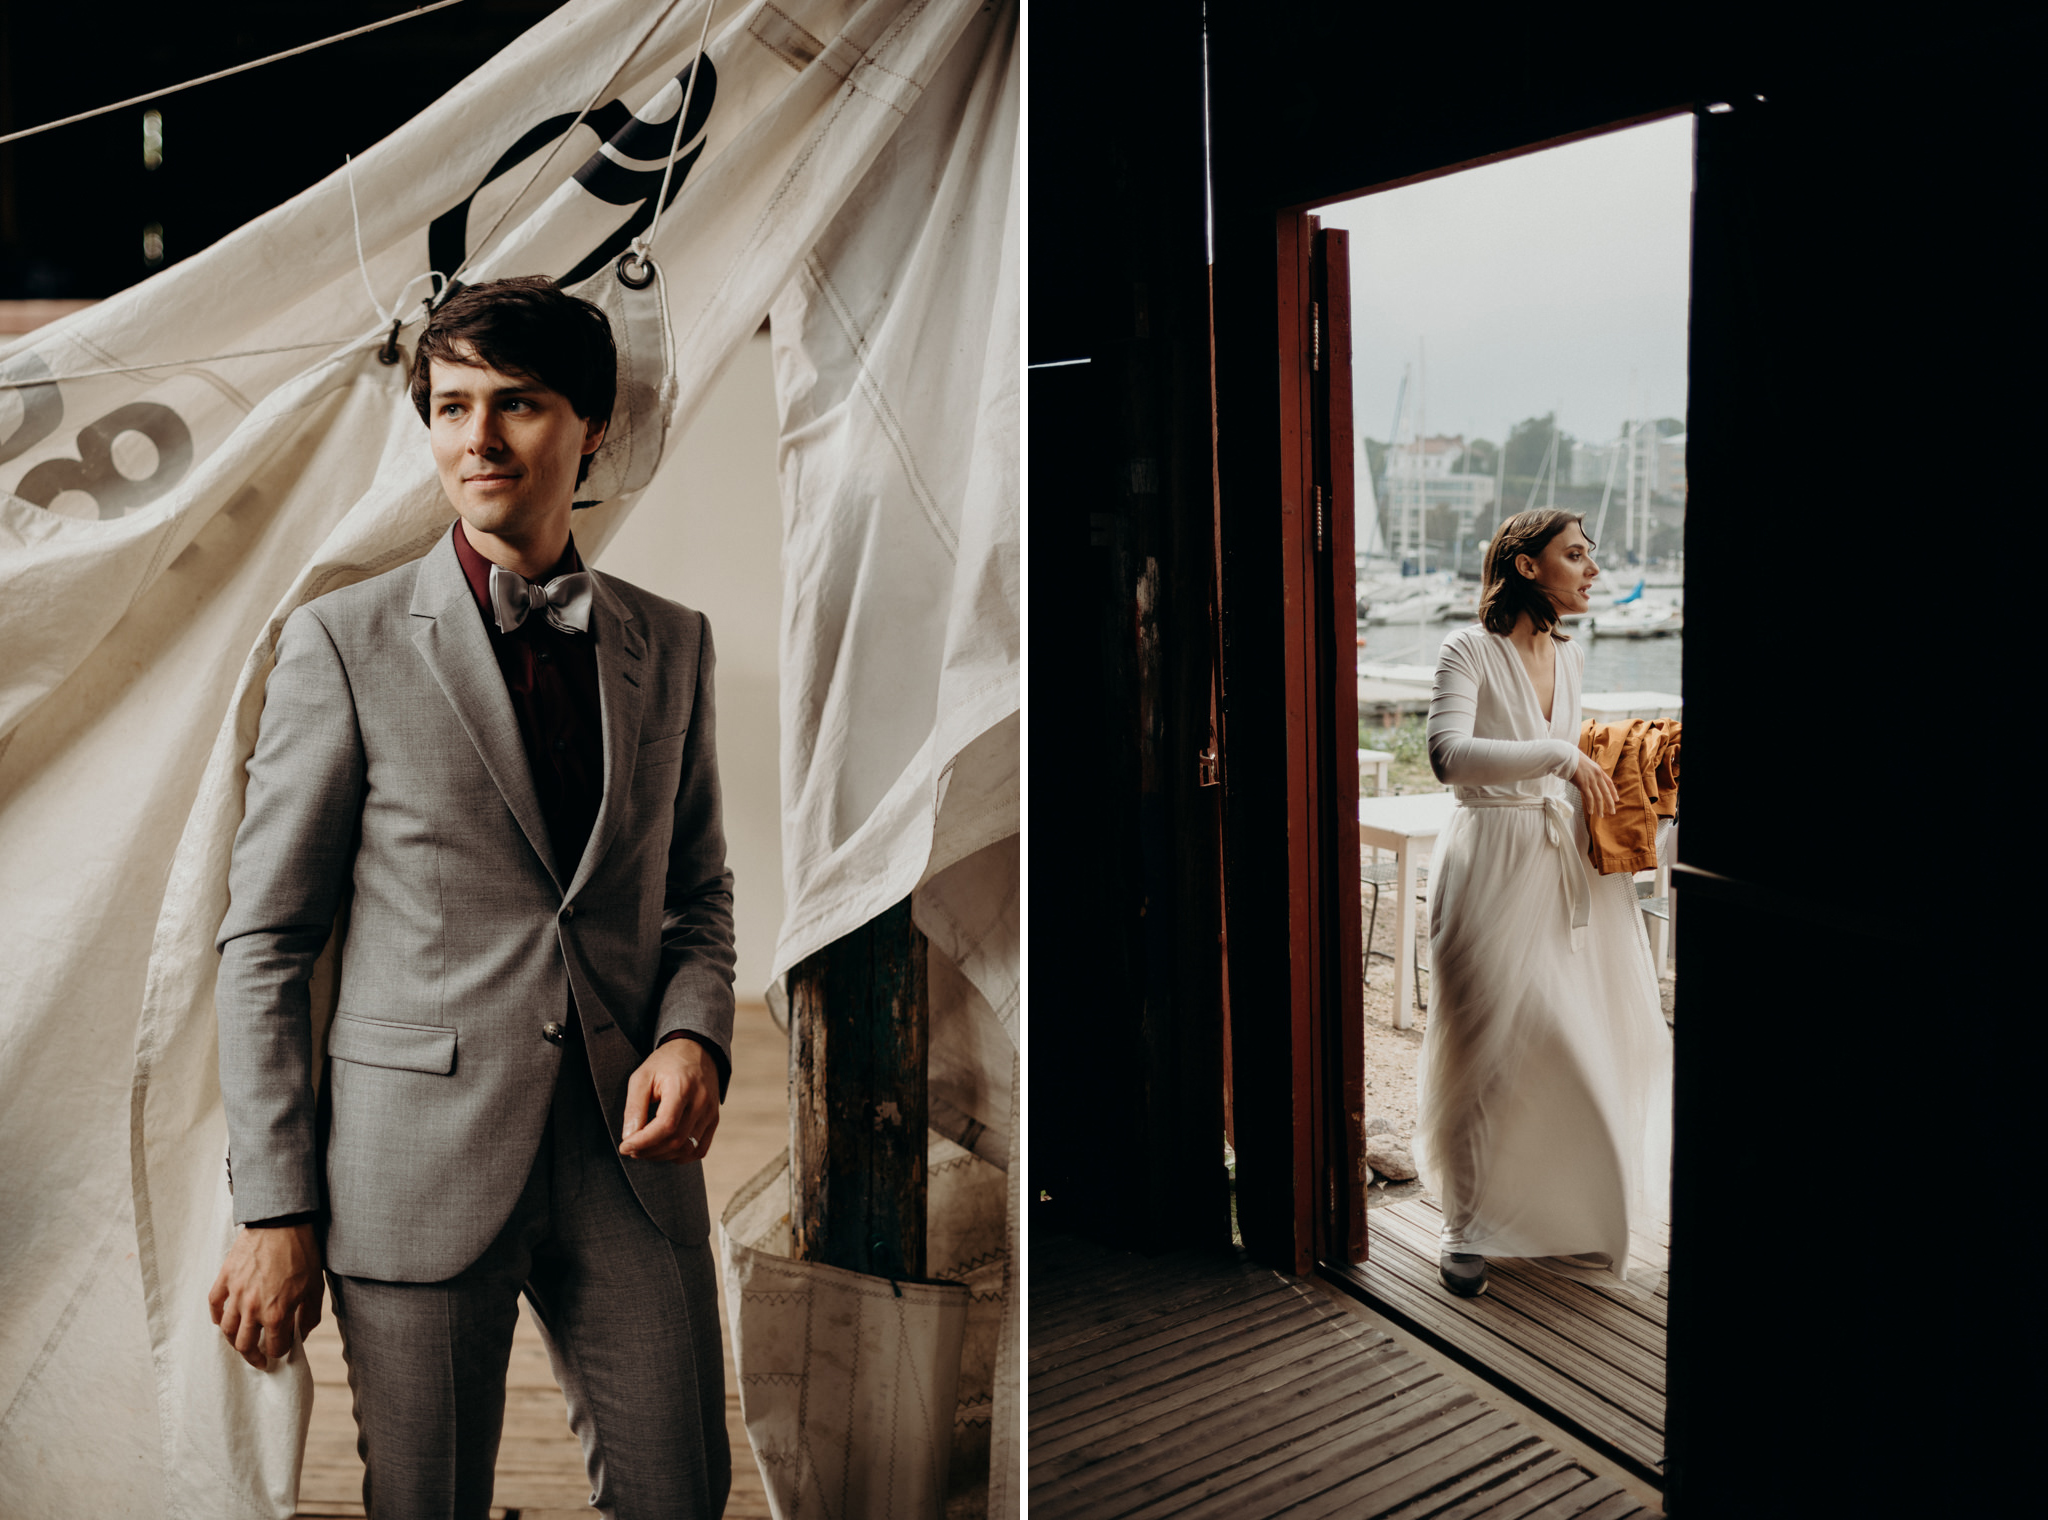 bride and groom getting dressed in old boathouse in Helsinki